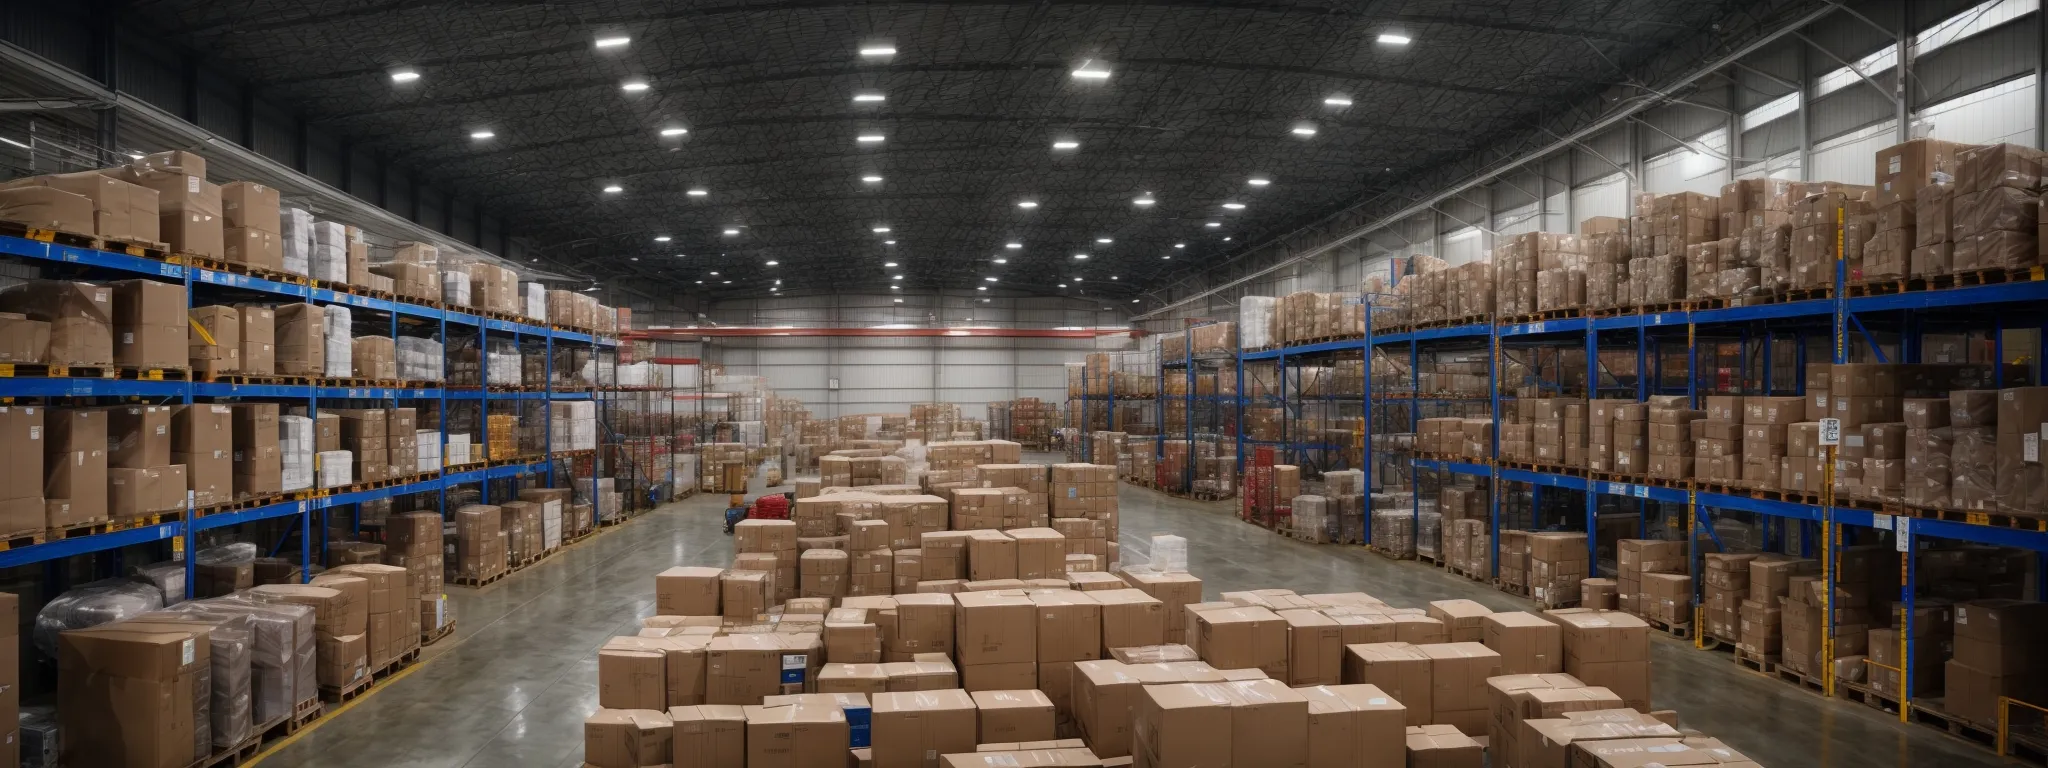 a wide-angle view of a bustling e-commerce warehouse with rows of diverse products ready for shipping.